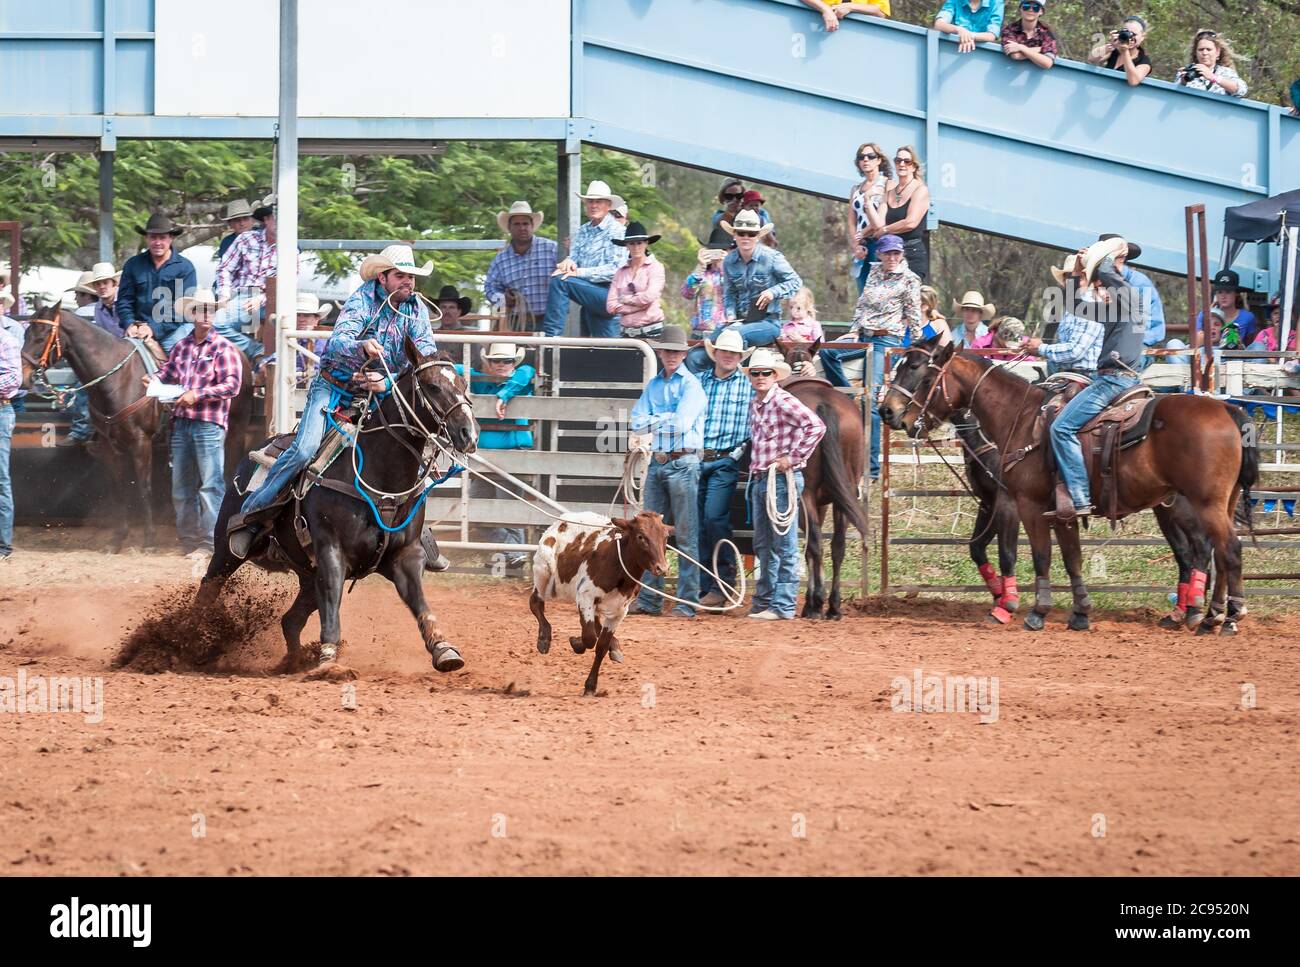 With an audience and fellow competitors looking on a cowgirl in a calf roping event is in full stride at Mt Garnet Rodeo, Queensland, Australia. Stock Photo